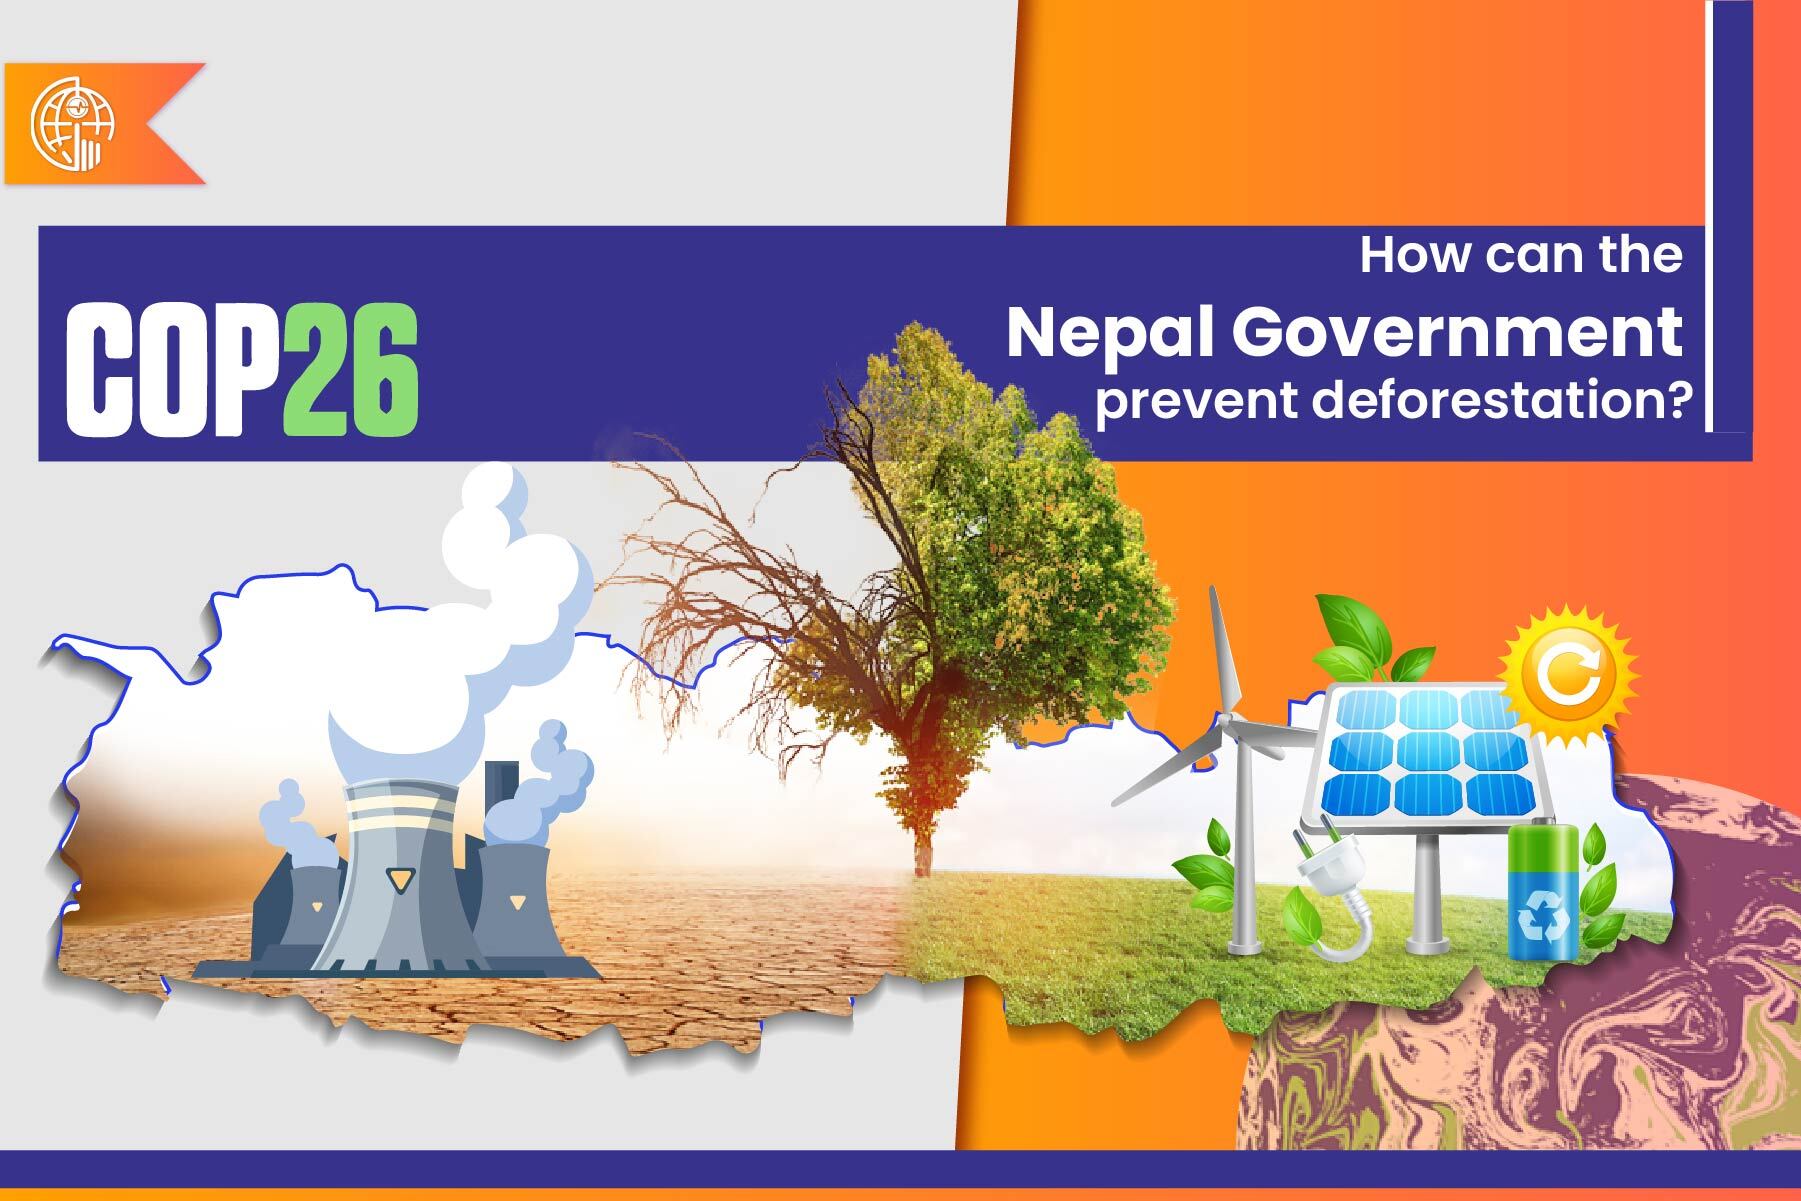 How can the Nepal Government live up to the ambitious goals committed during COP 26?